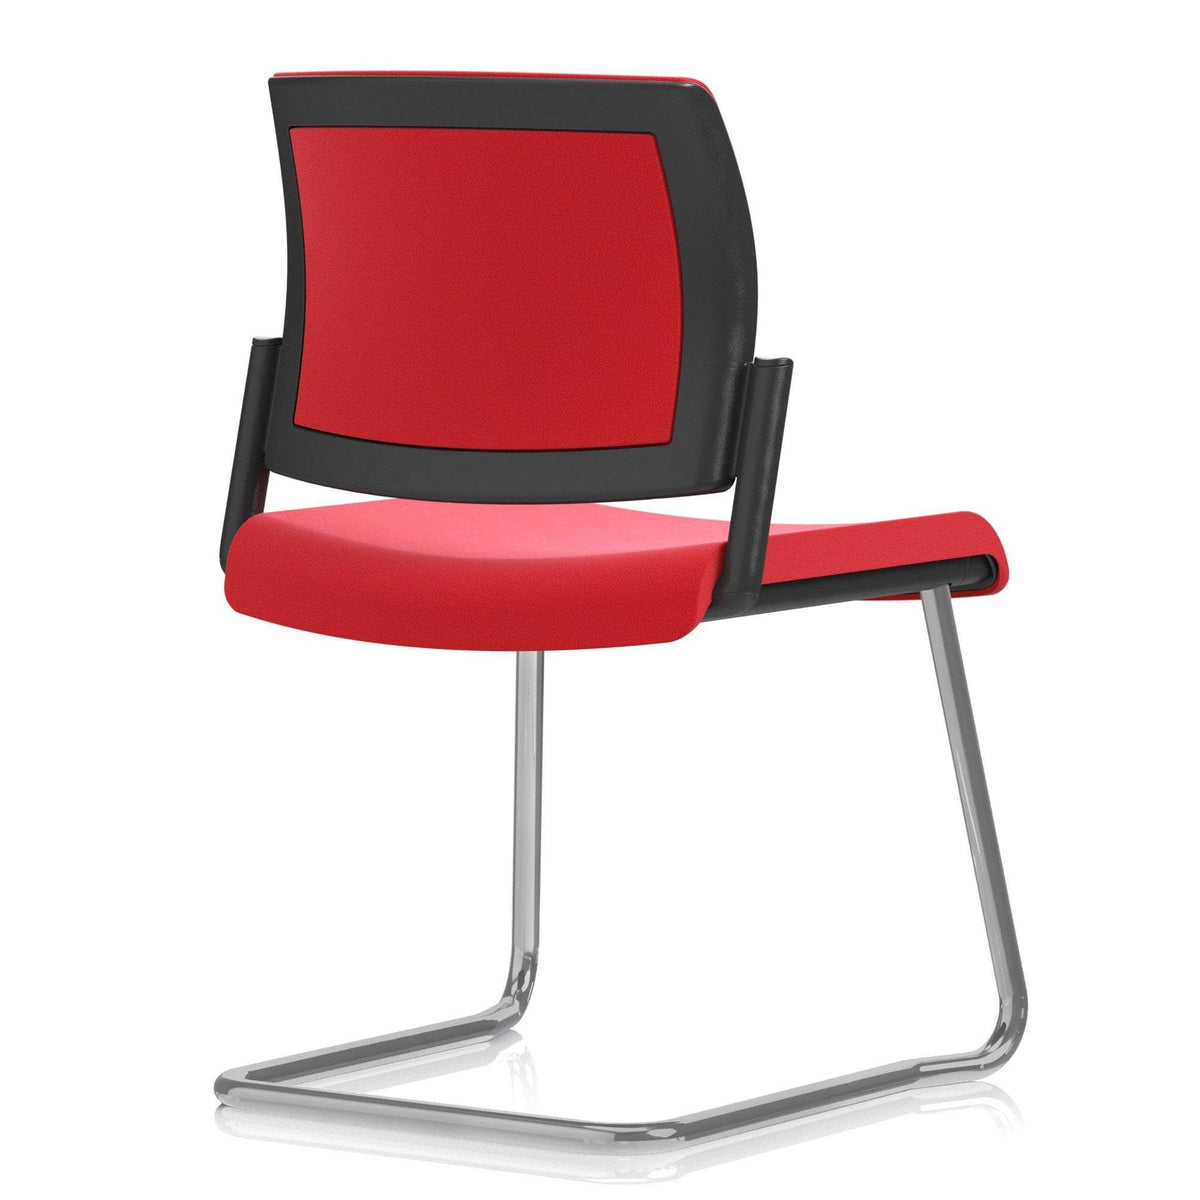 conference chair Cantilever Frame / No Arms Kindle Conference Chair Cantilever Frame / No Arms